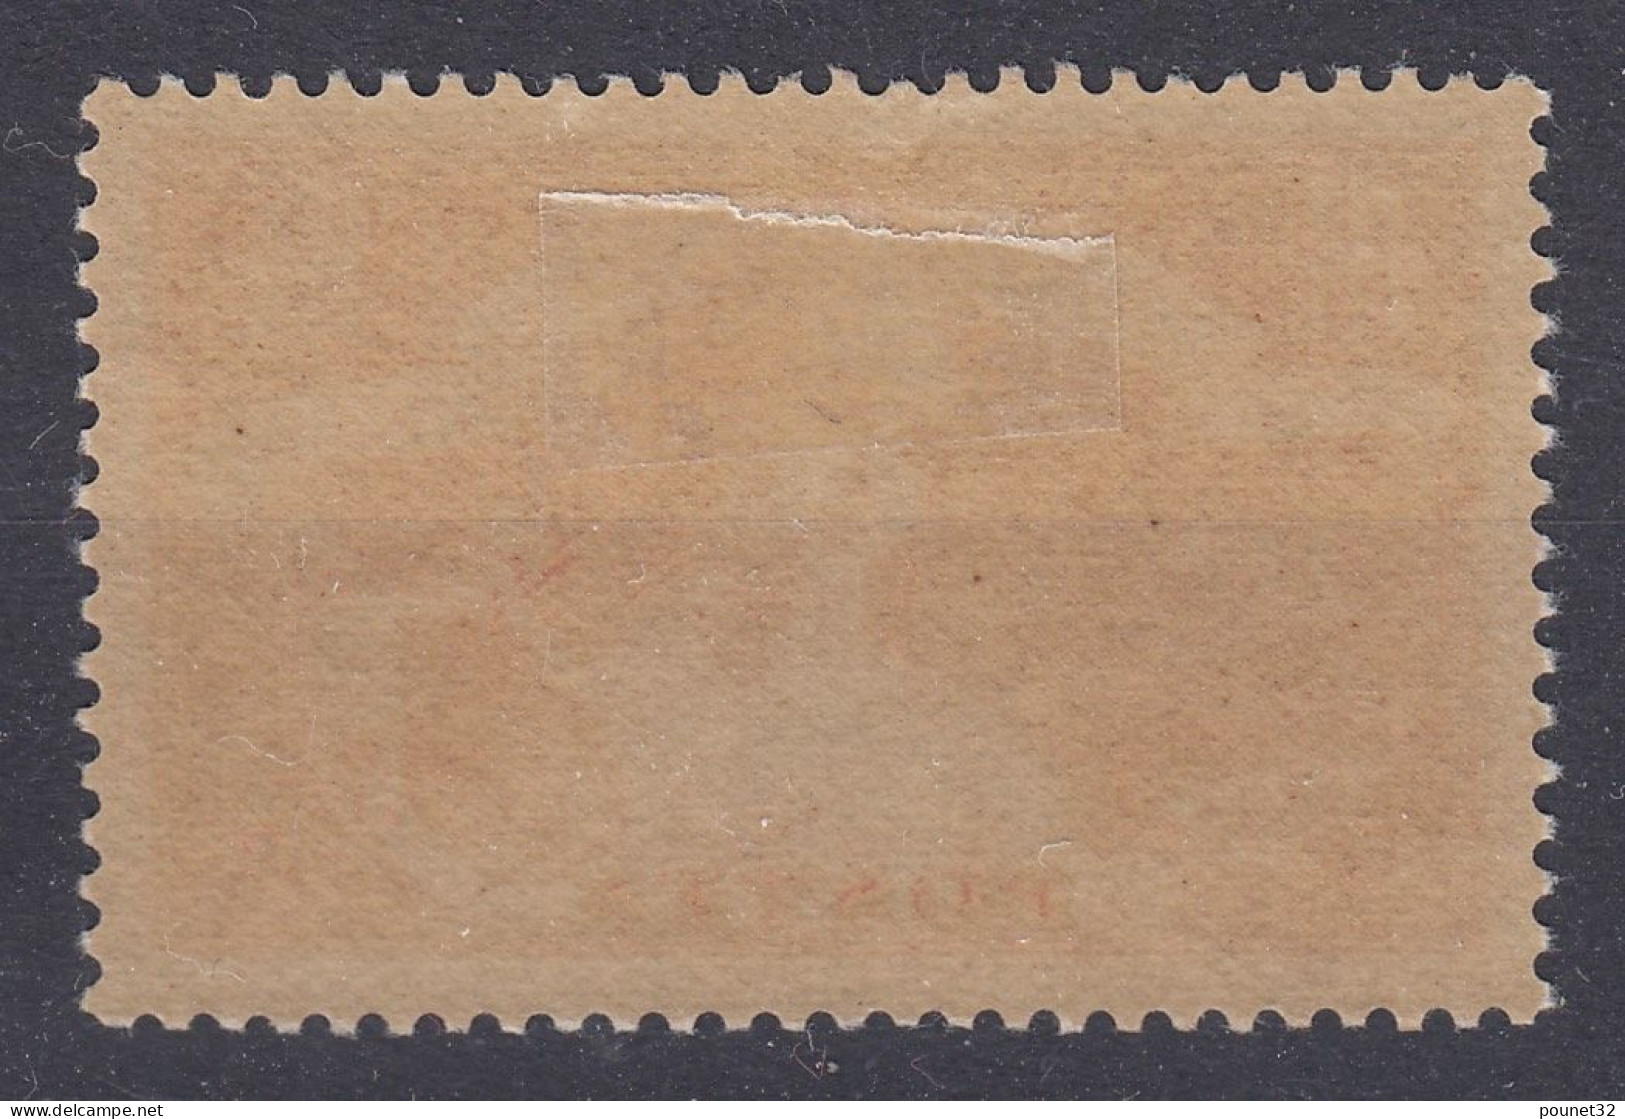 TIMBRE FRANCE ART & LA PENSEE N° 308 NEUF * GOMME TRACE DE CHARNIERE - COTE 65 € - Unused Stamps